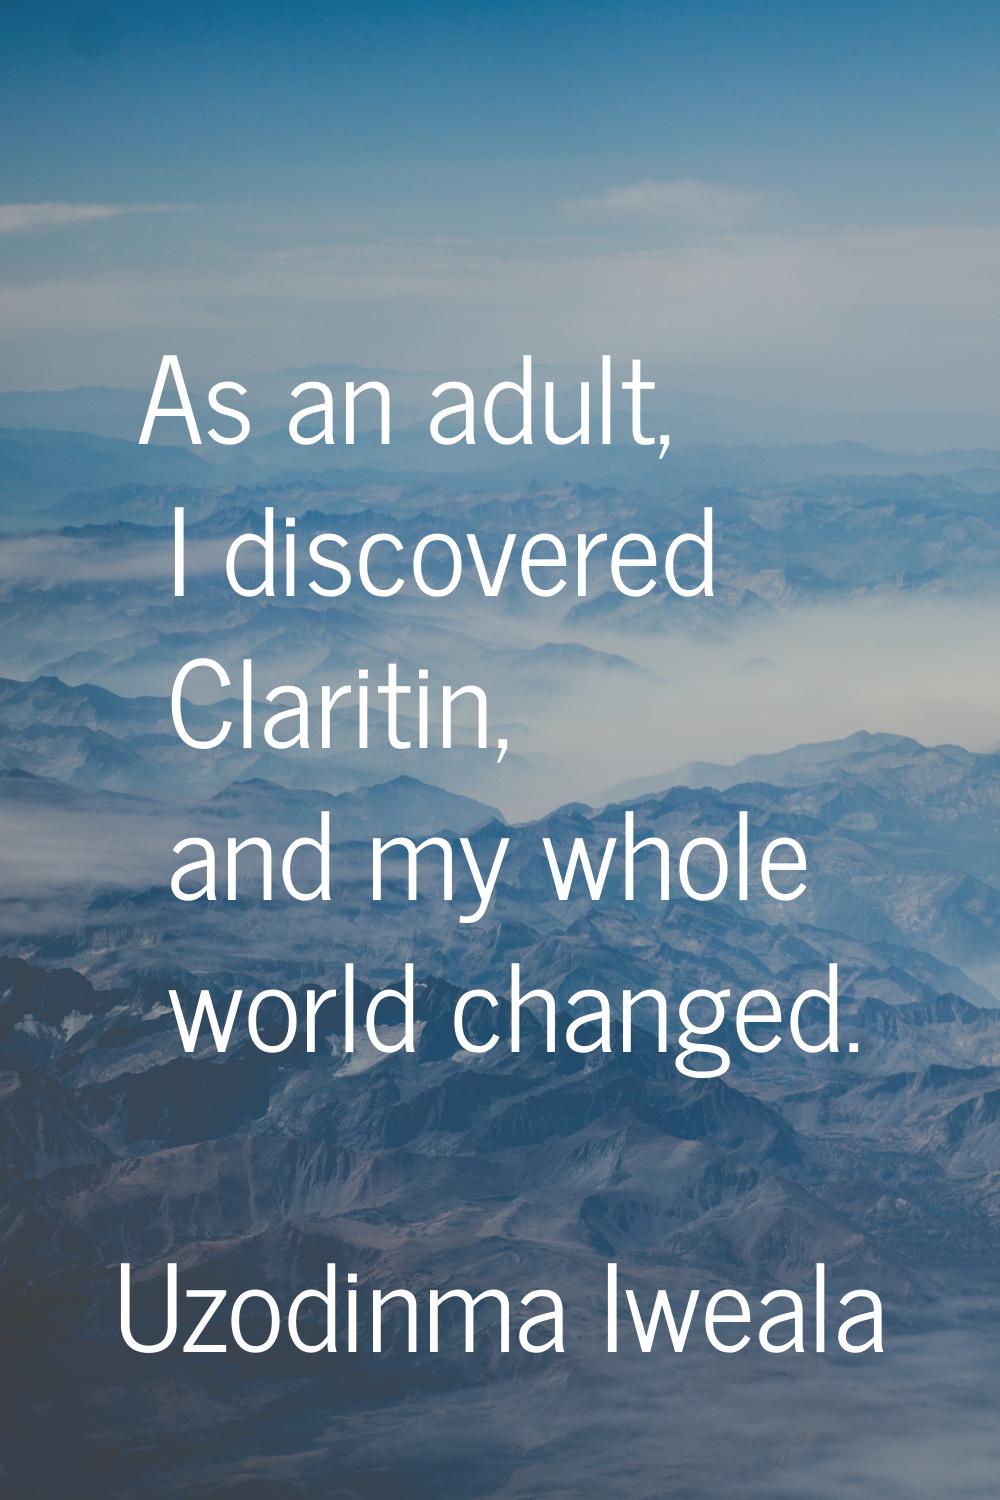 As an adult, I discovered Claritin, and my whole world changed.